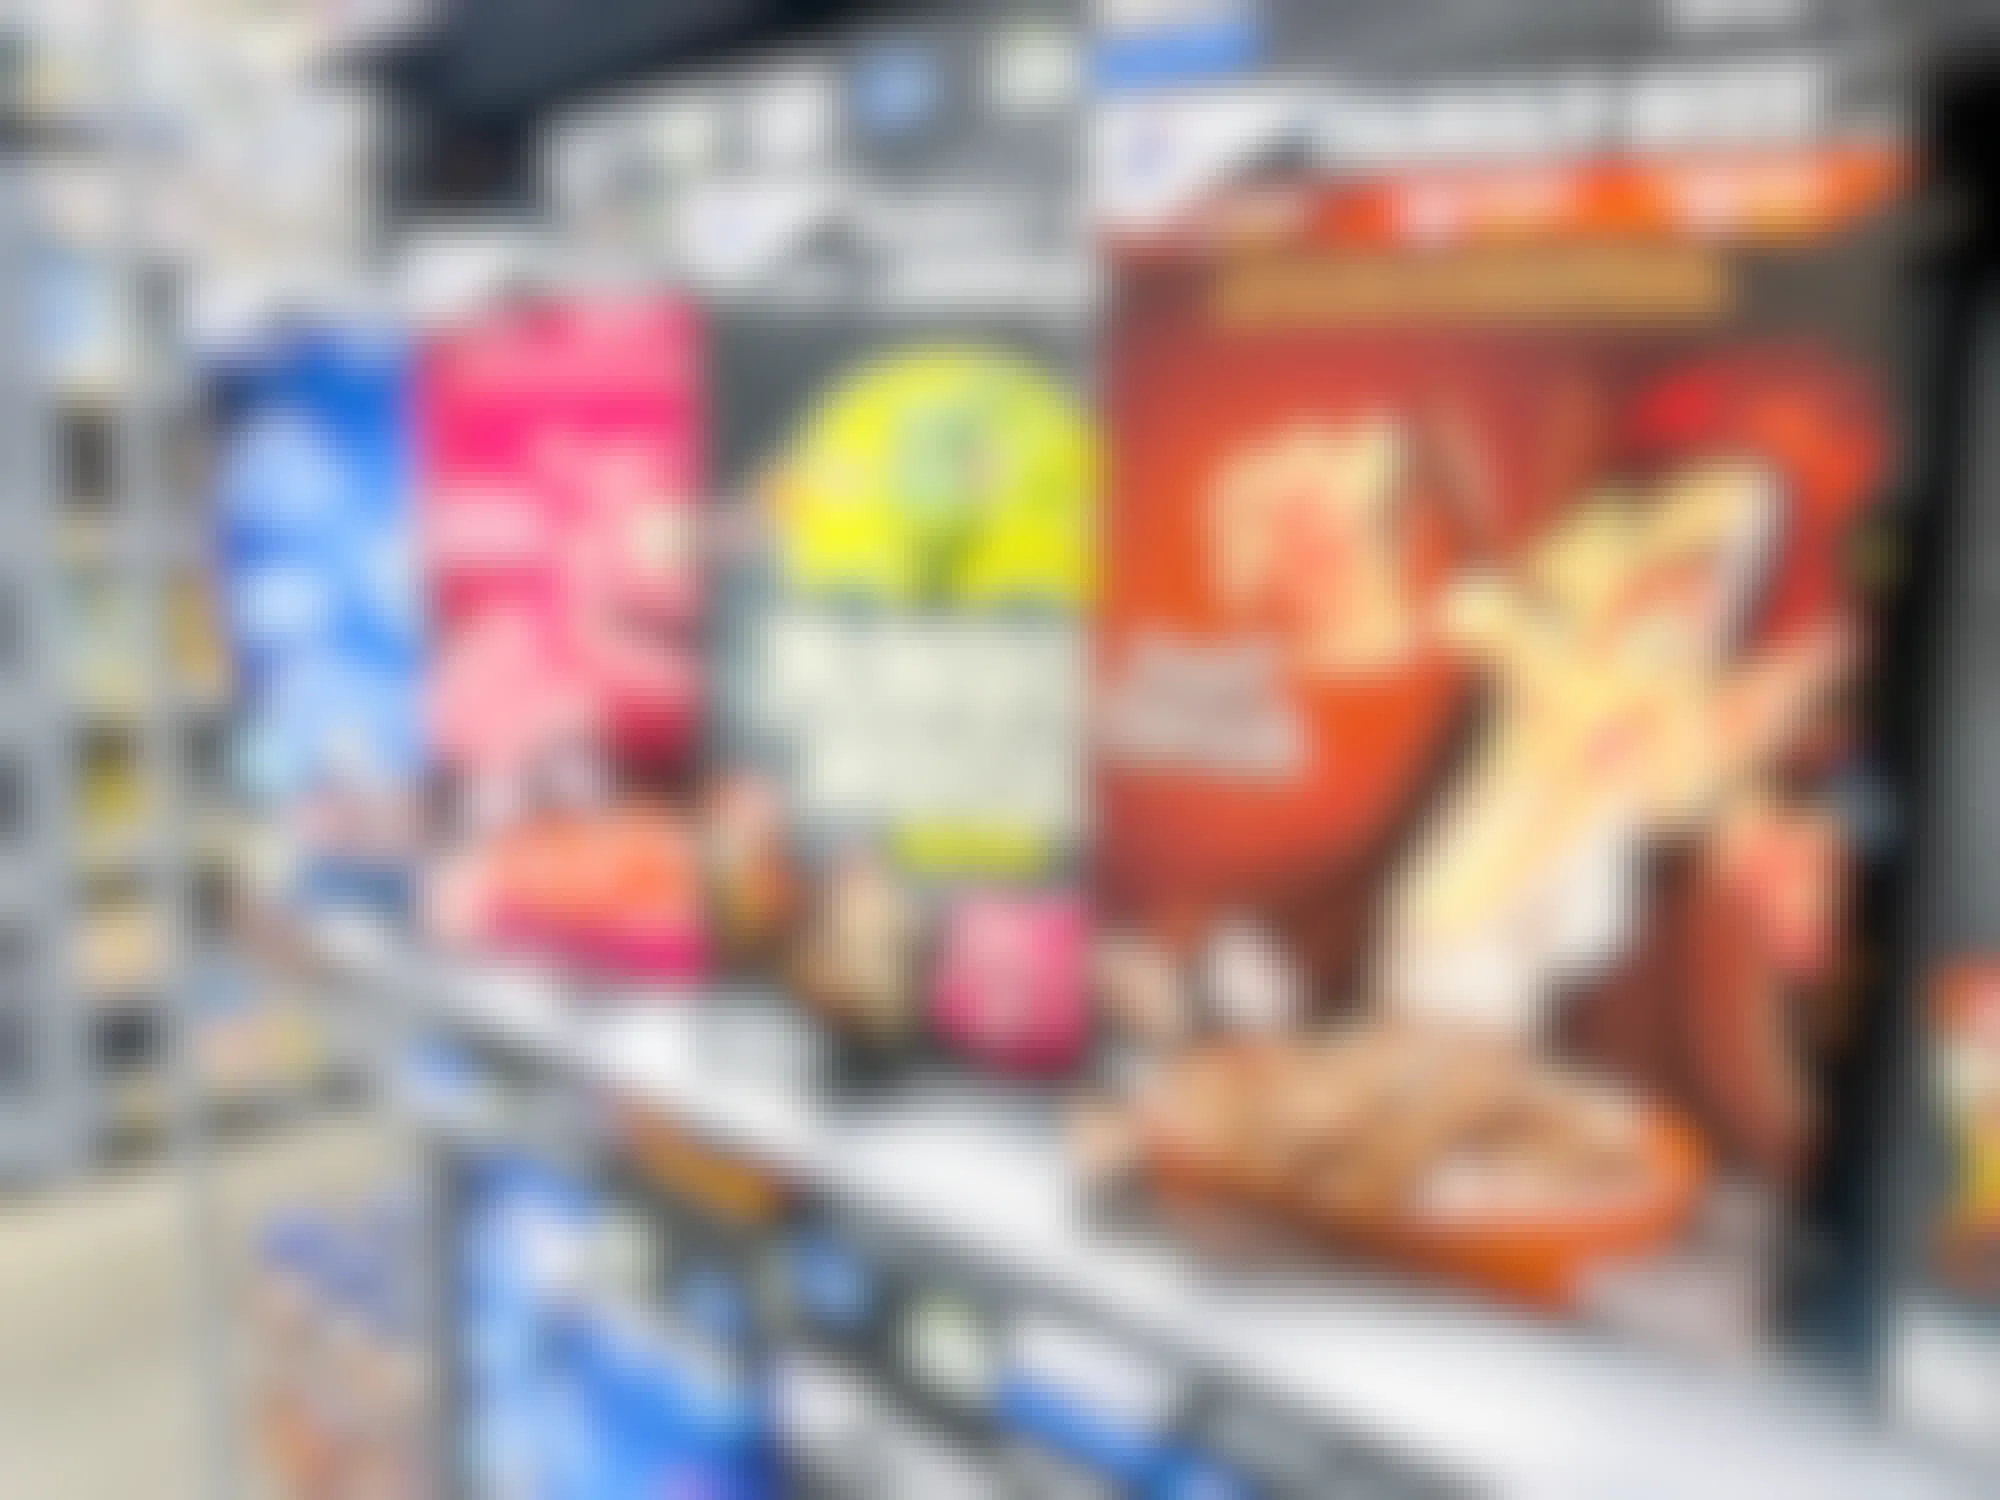 boxes of Boo Berry,Franken Berry, Monster Mash Remix, and Count Chocula monster cereal at Walmart